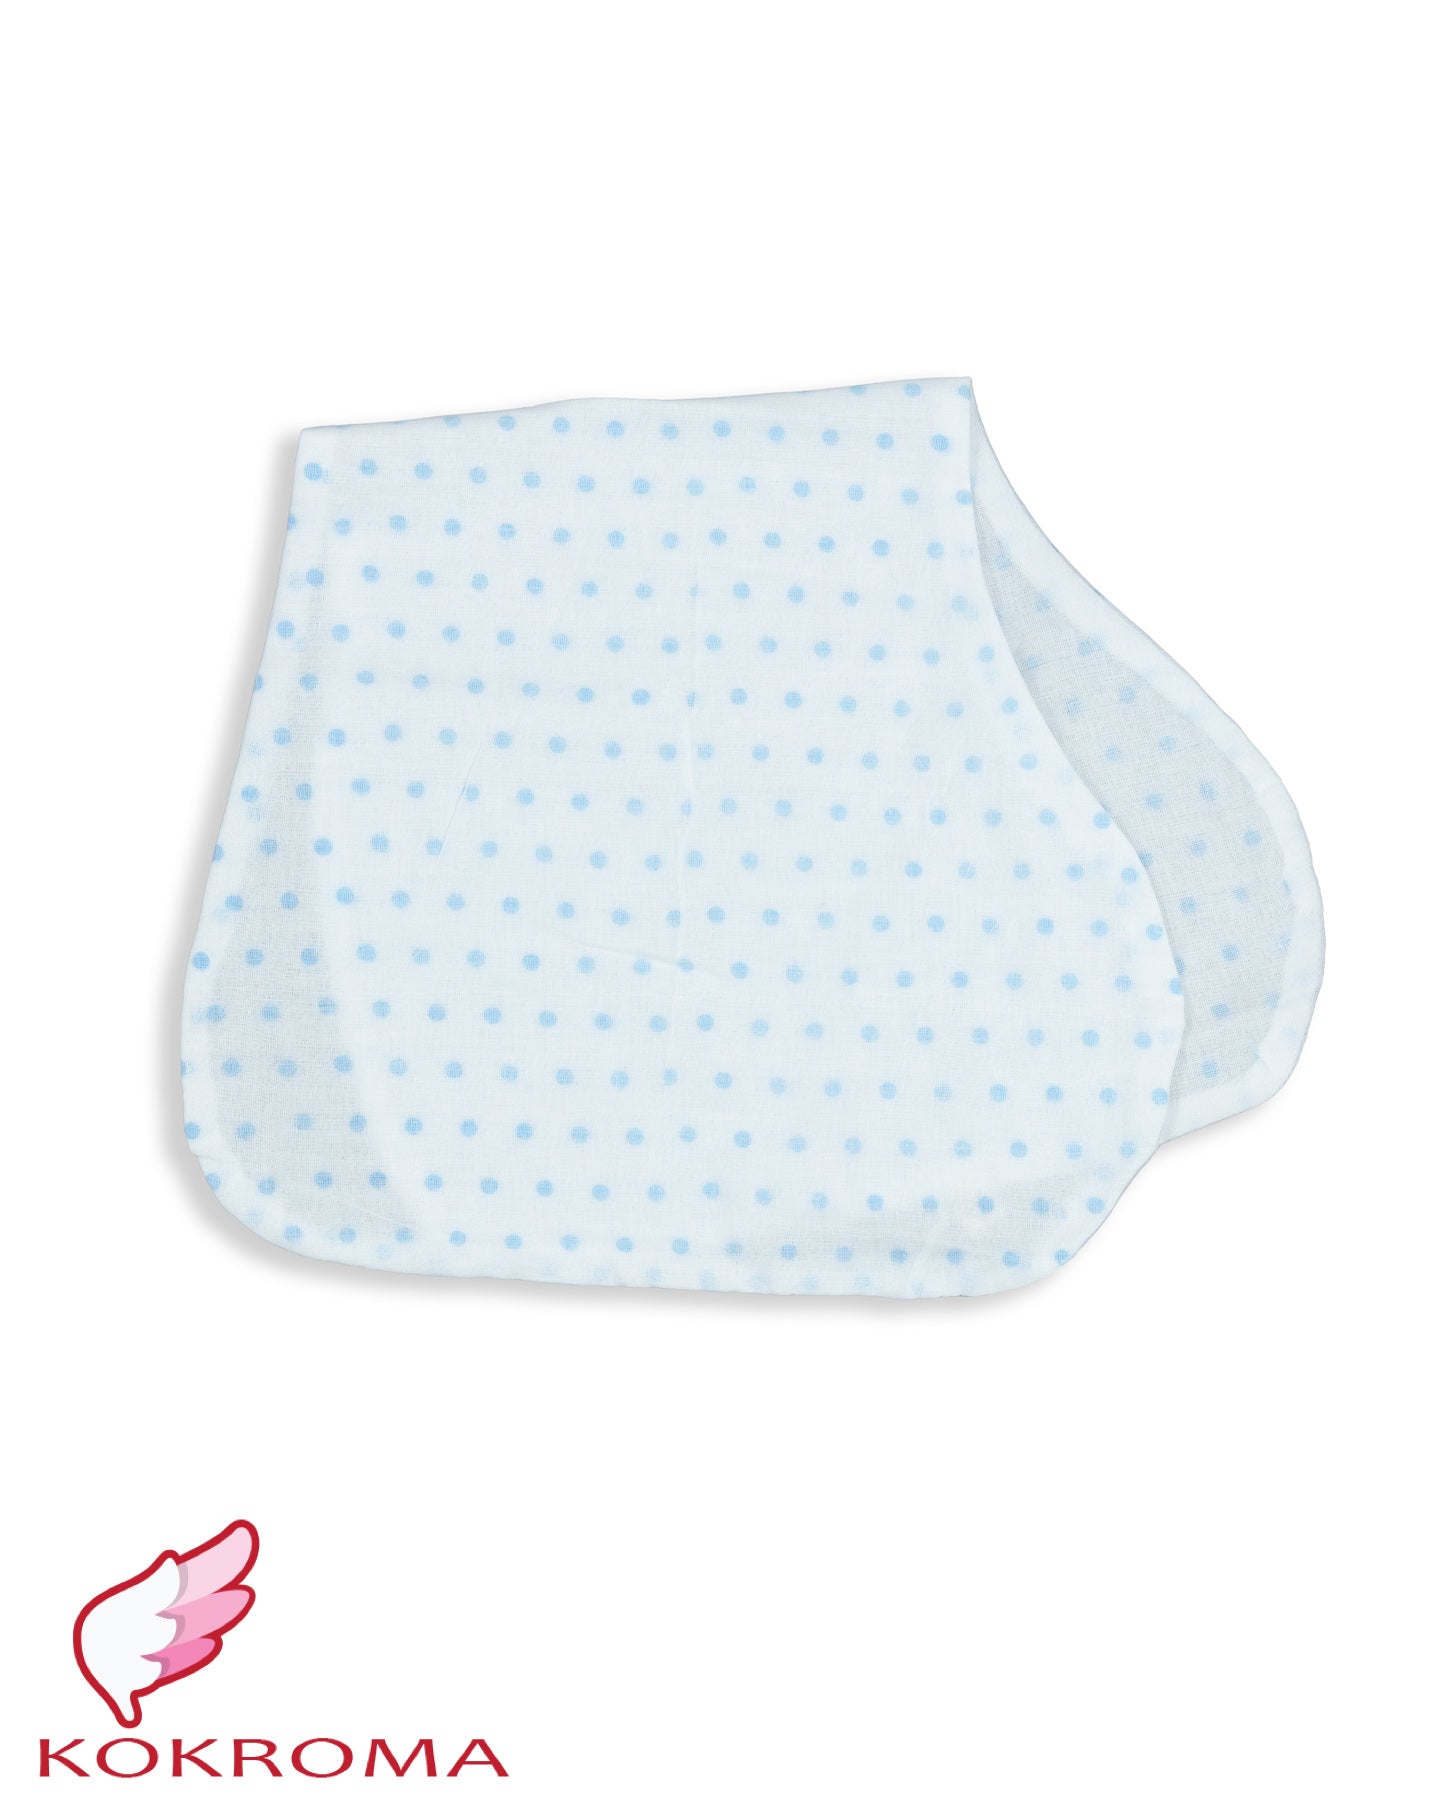 Triple gauze muslin burp cloths are ideal for the early year of newborn babies. Contoured to sit over the shoulder, the soft muslin cotton stops it from slipping. Three layers of fabric make it very comfortable for your little baby to rest their head, and protect your clothing from little burping deposits! Blue Small Dot